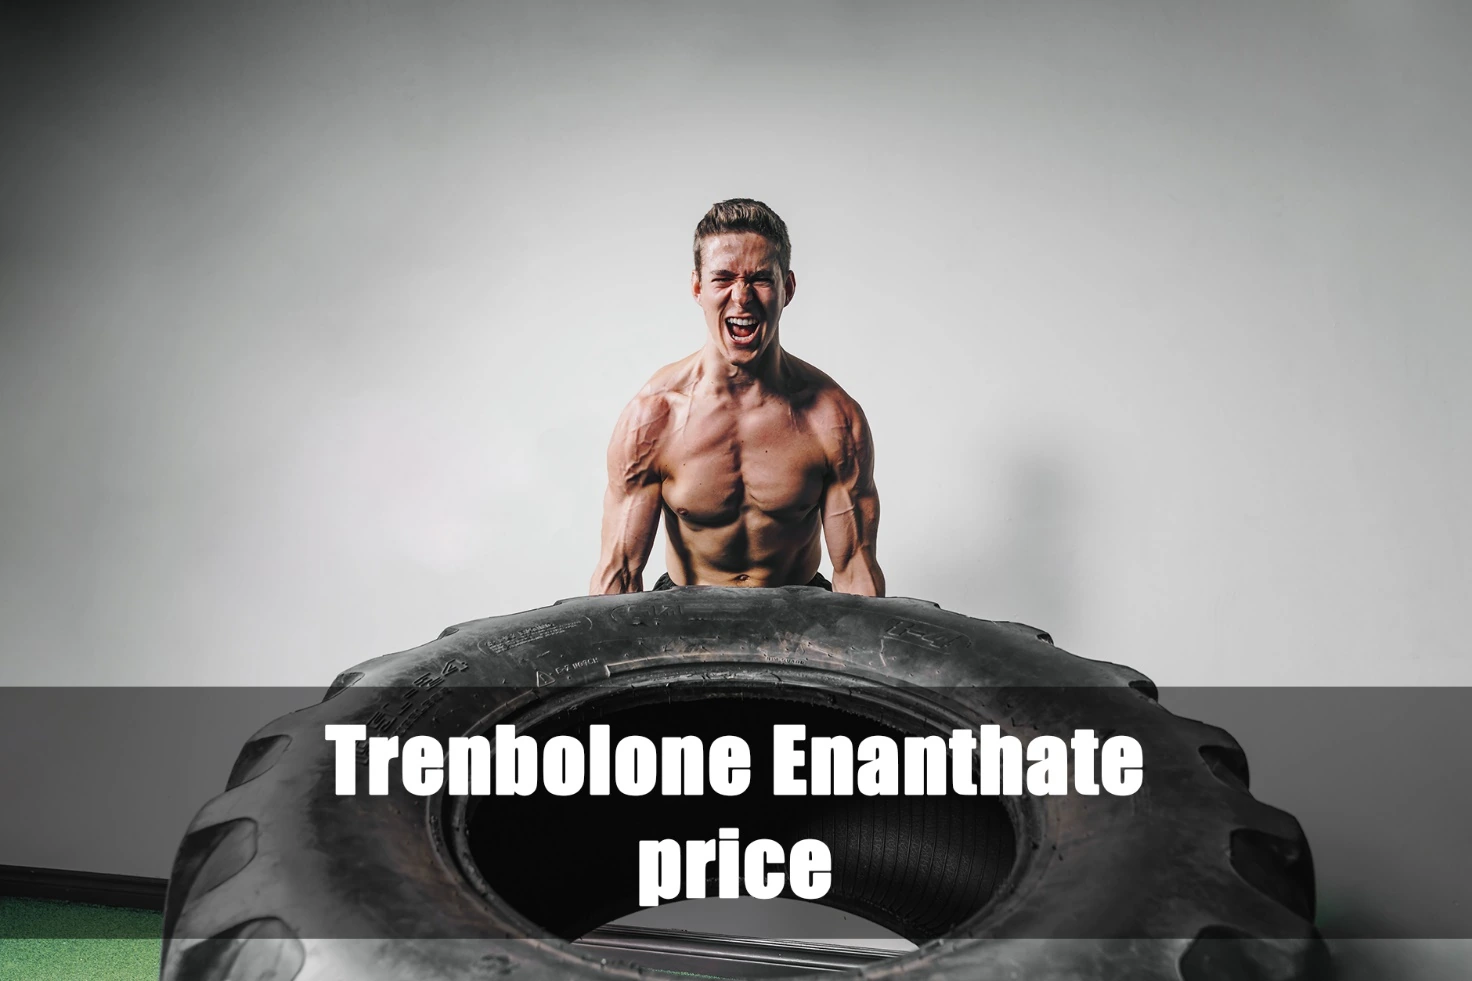 Trenbolone enanthate price